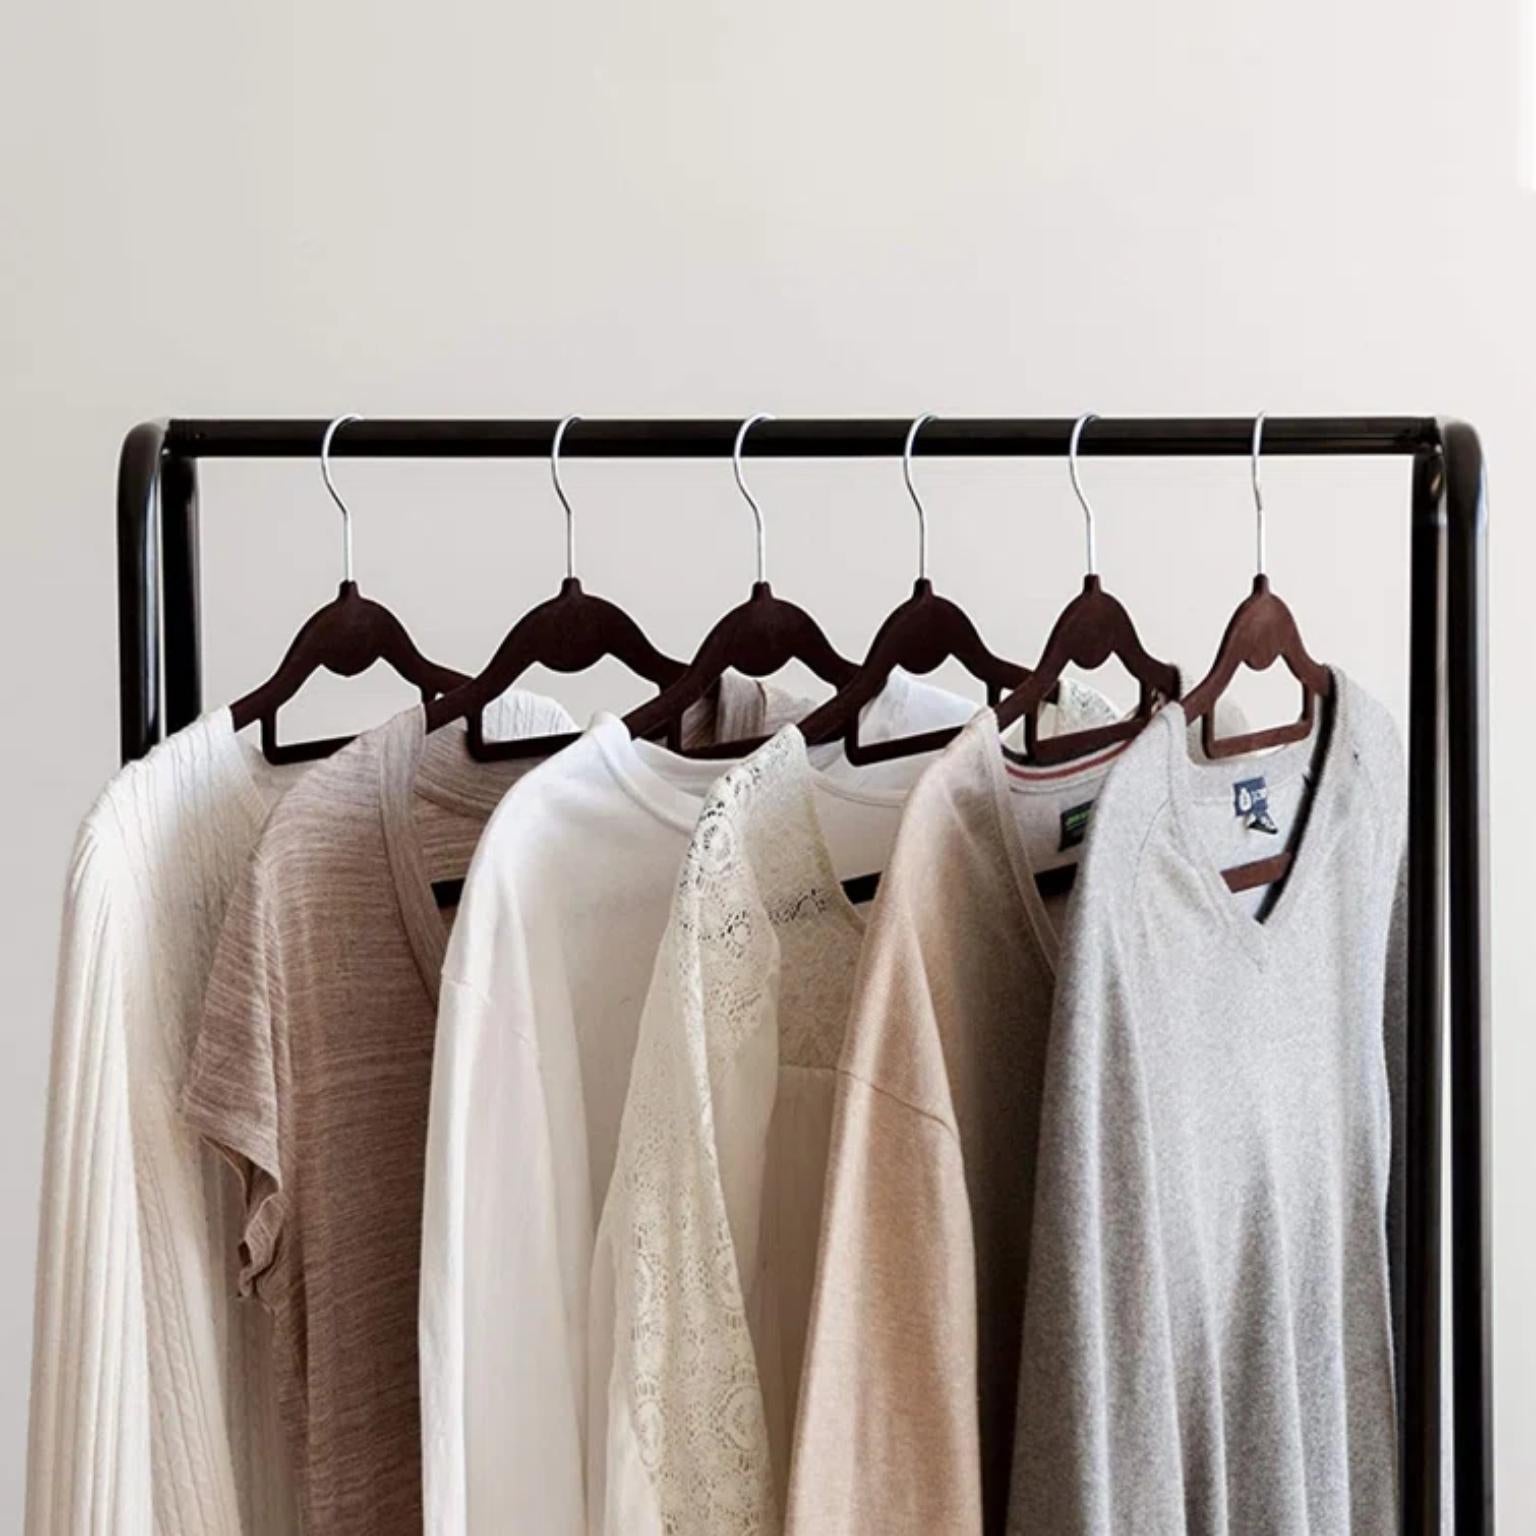 clothes rack blouses on display